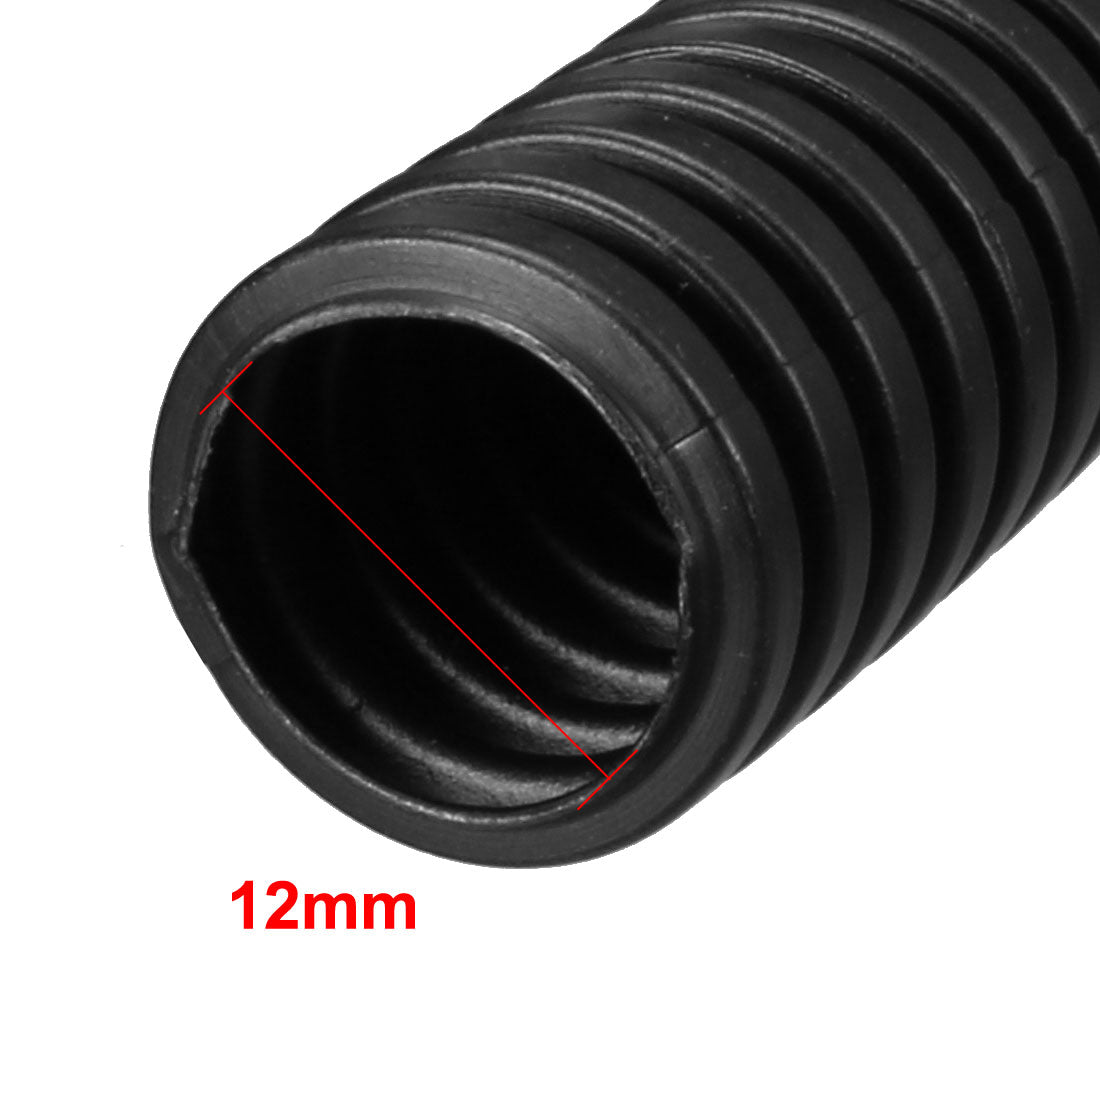 uxcell Uxcell 7.6 M 12 x 16 mm Plastic Corrugated Conduit Tube for Garden,Office Black